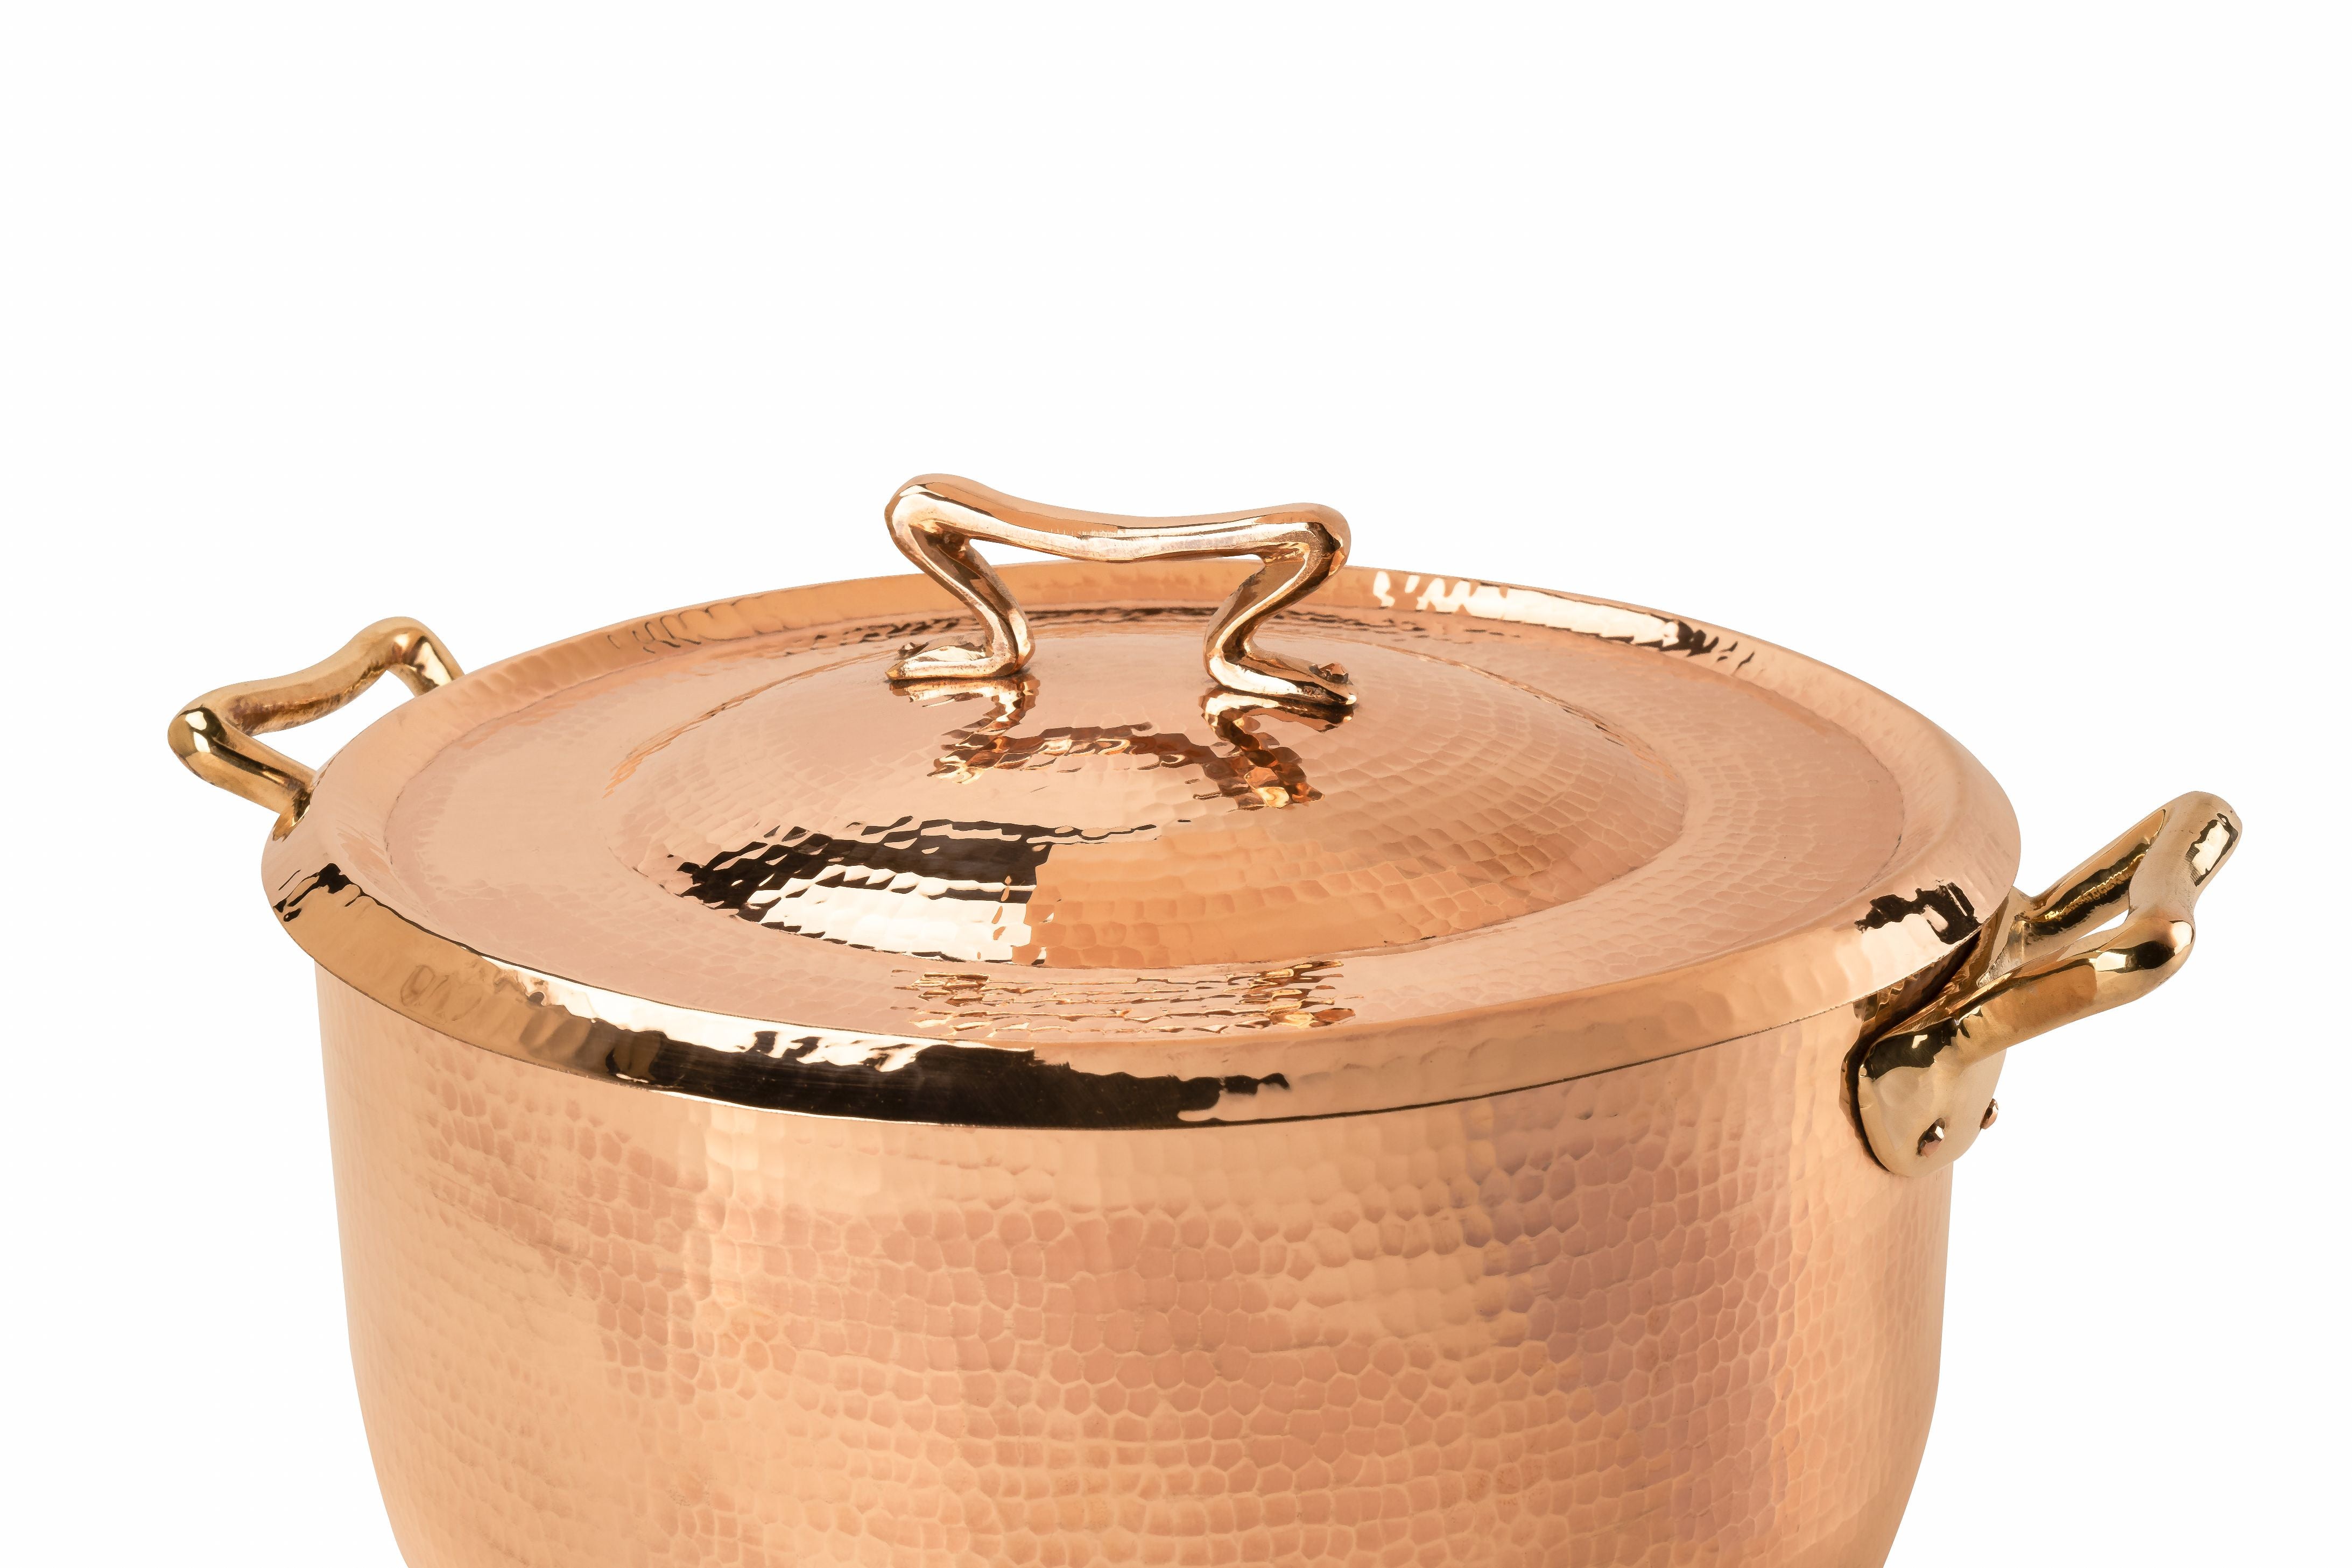 Amoretti Brothers  Luxury Hammered Copper Cookware Set of 11